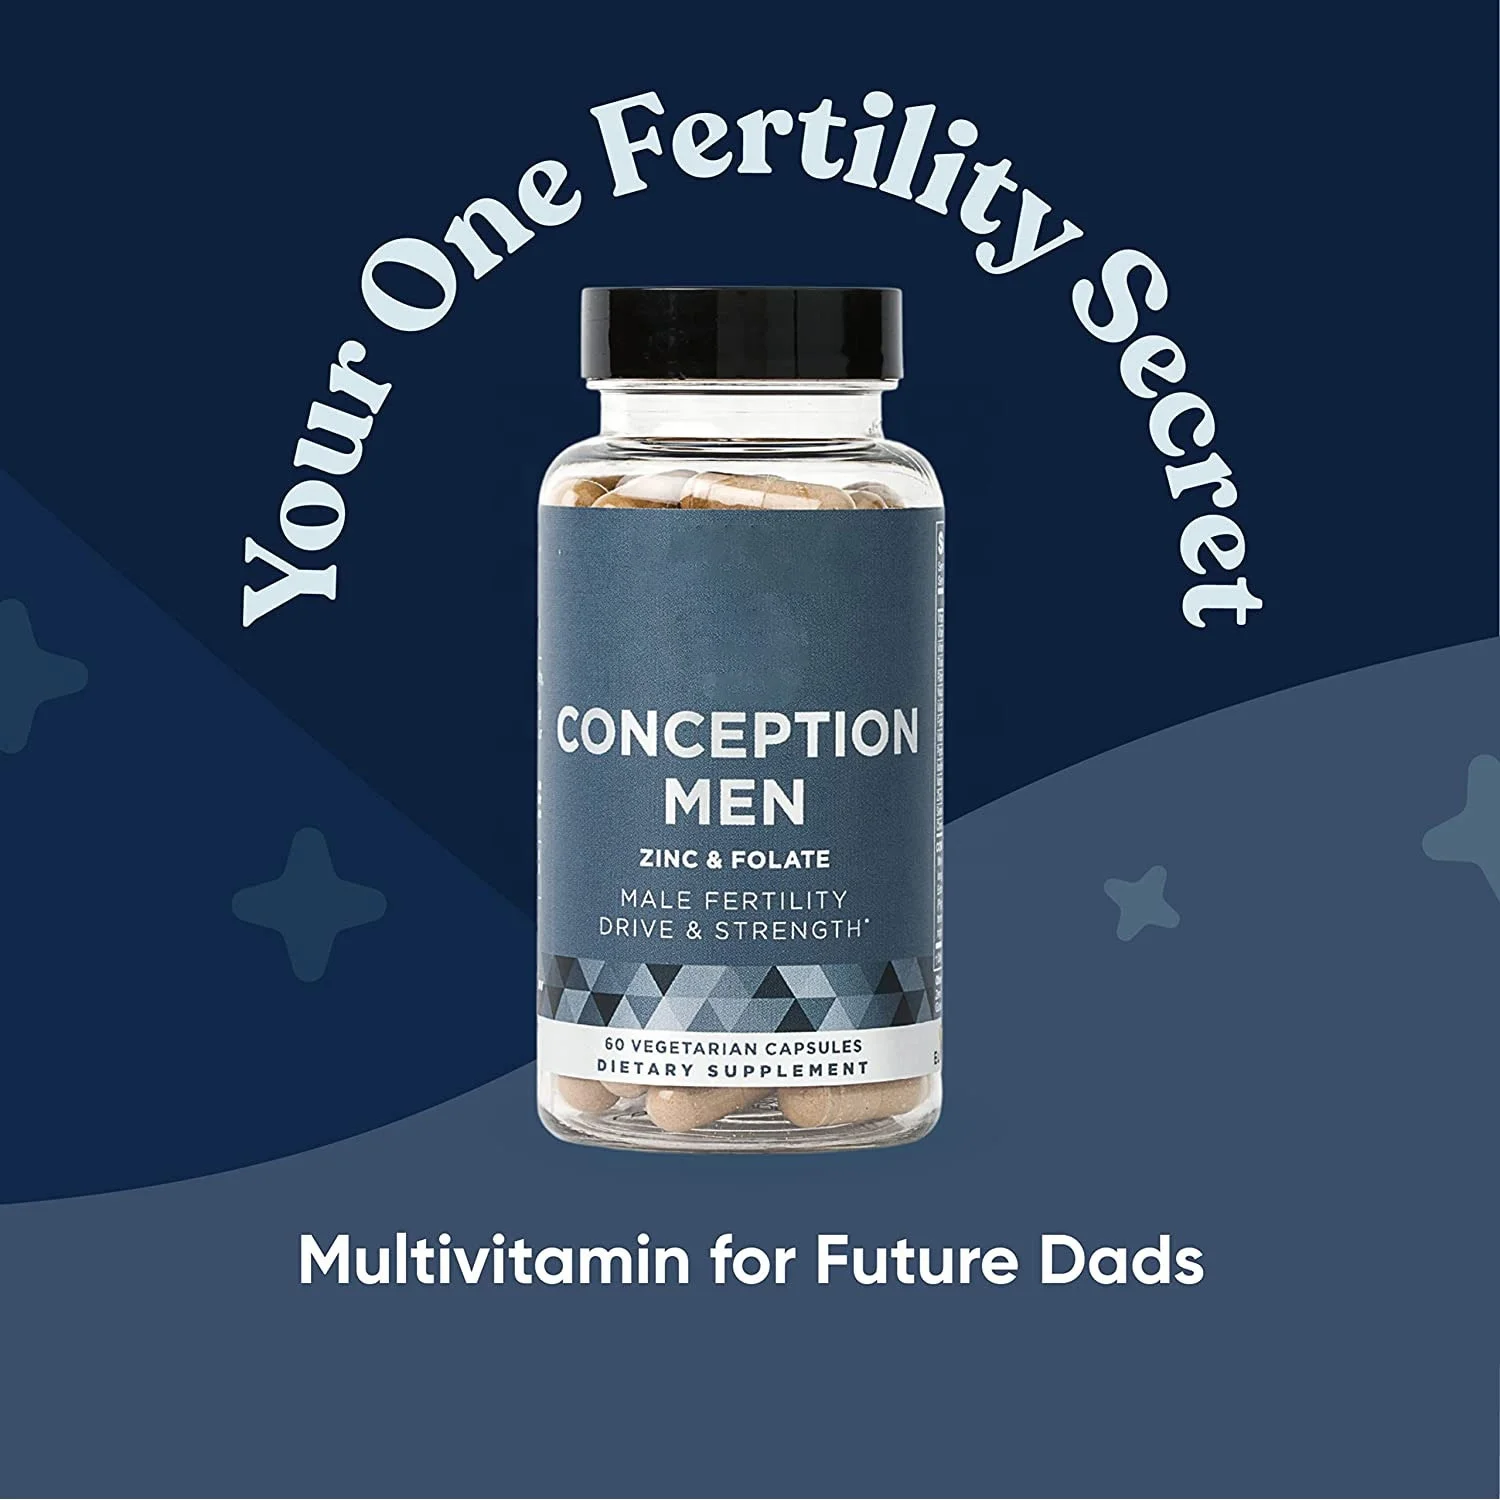 Conception Men Fertility Vitamins Male Optimal Count And Healthy Volume Production Zinc Folate 